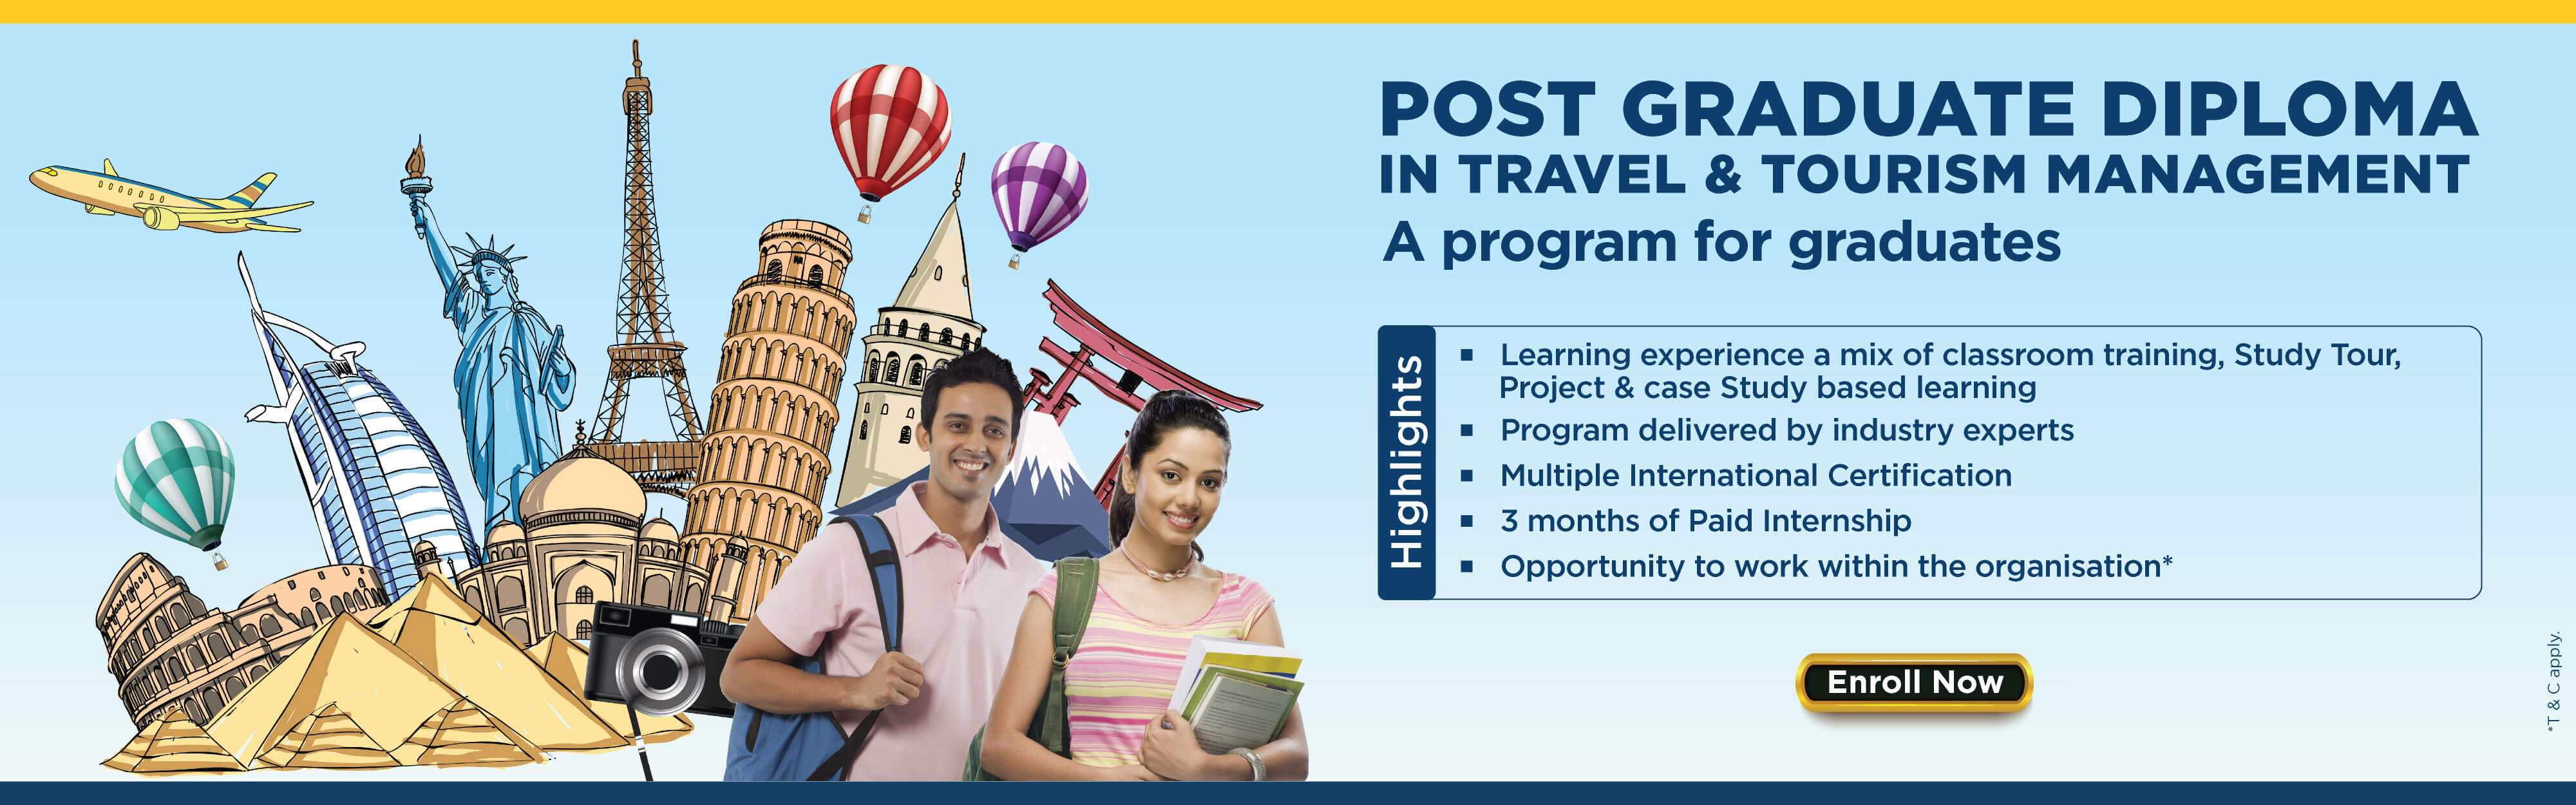 post graduate diploma in travel and tourism management